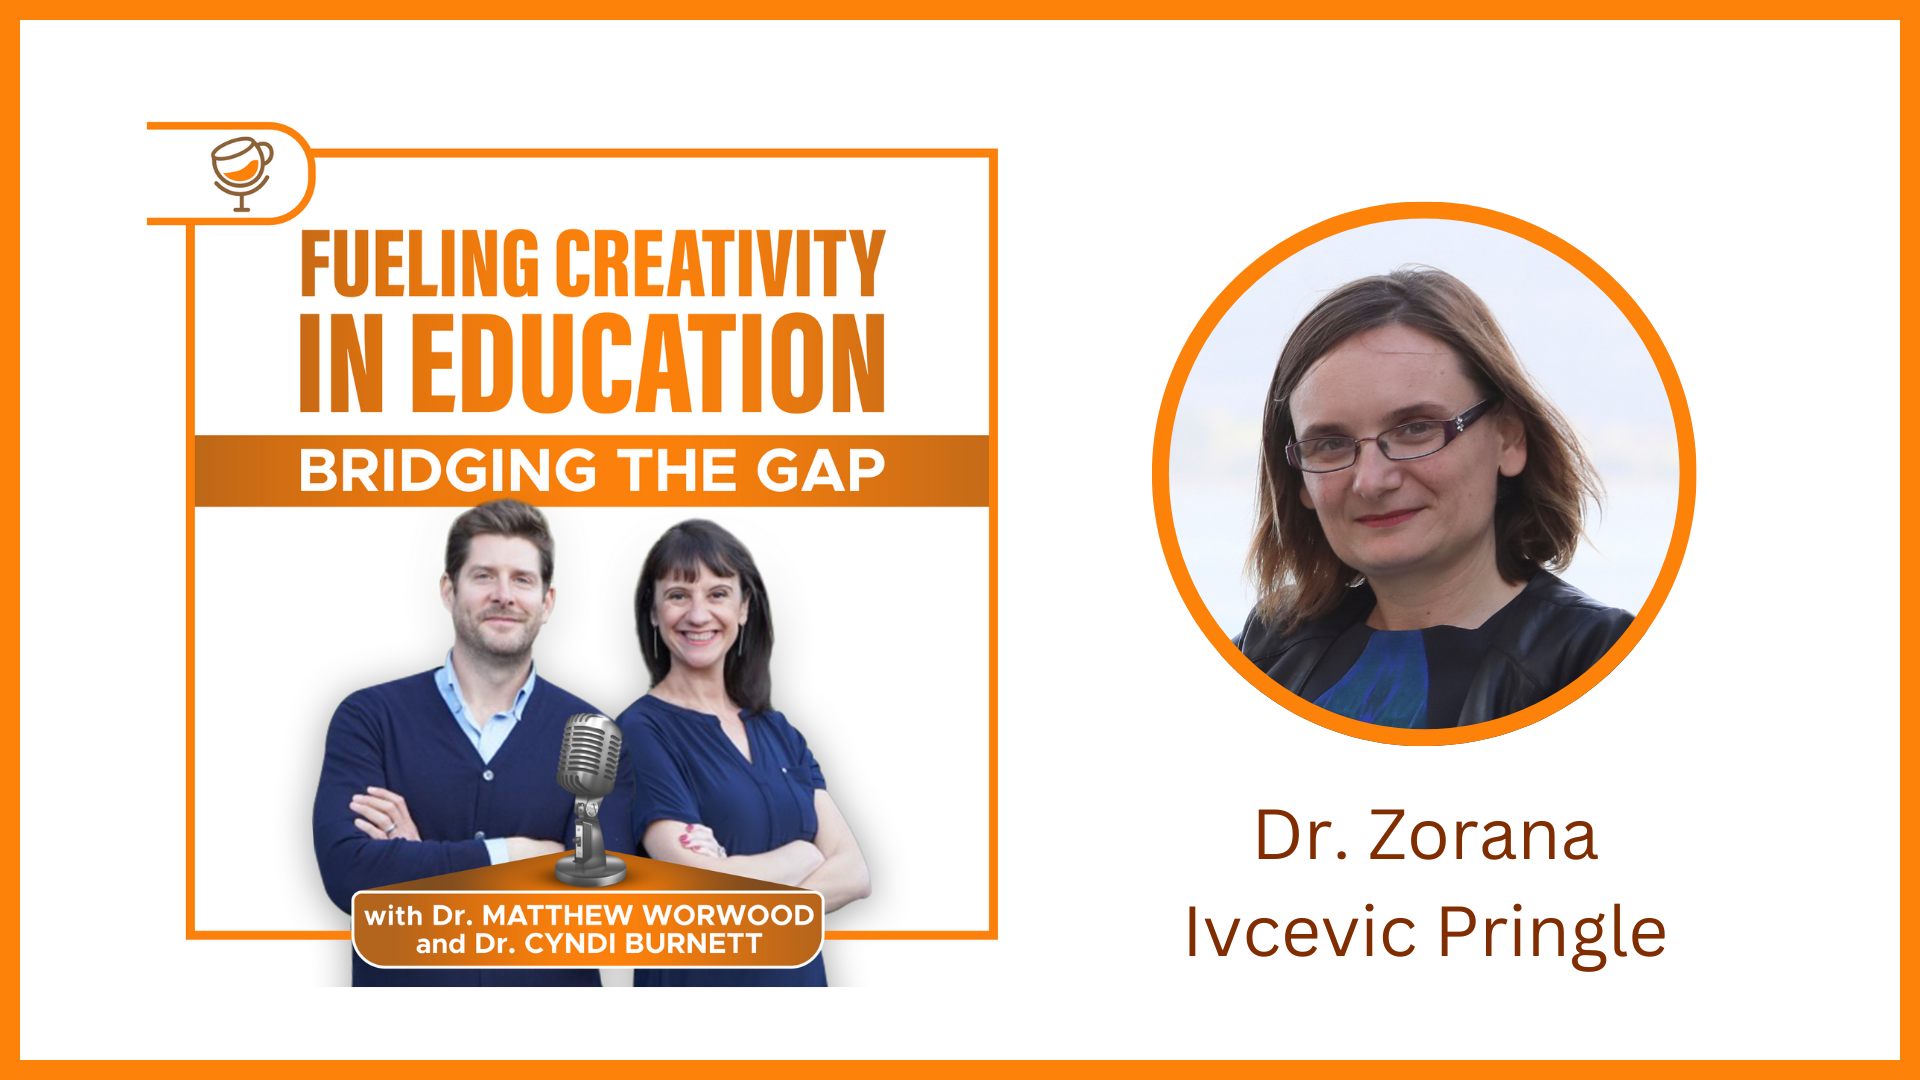 How emotions influence the creative process with Dr. Zorana Ivcevic Pringle